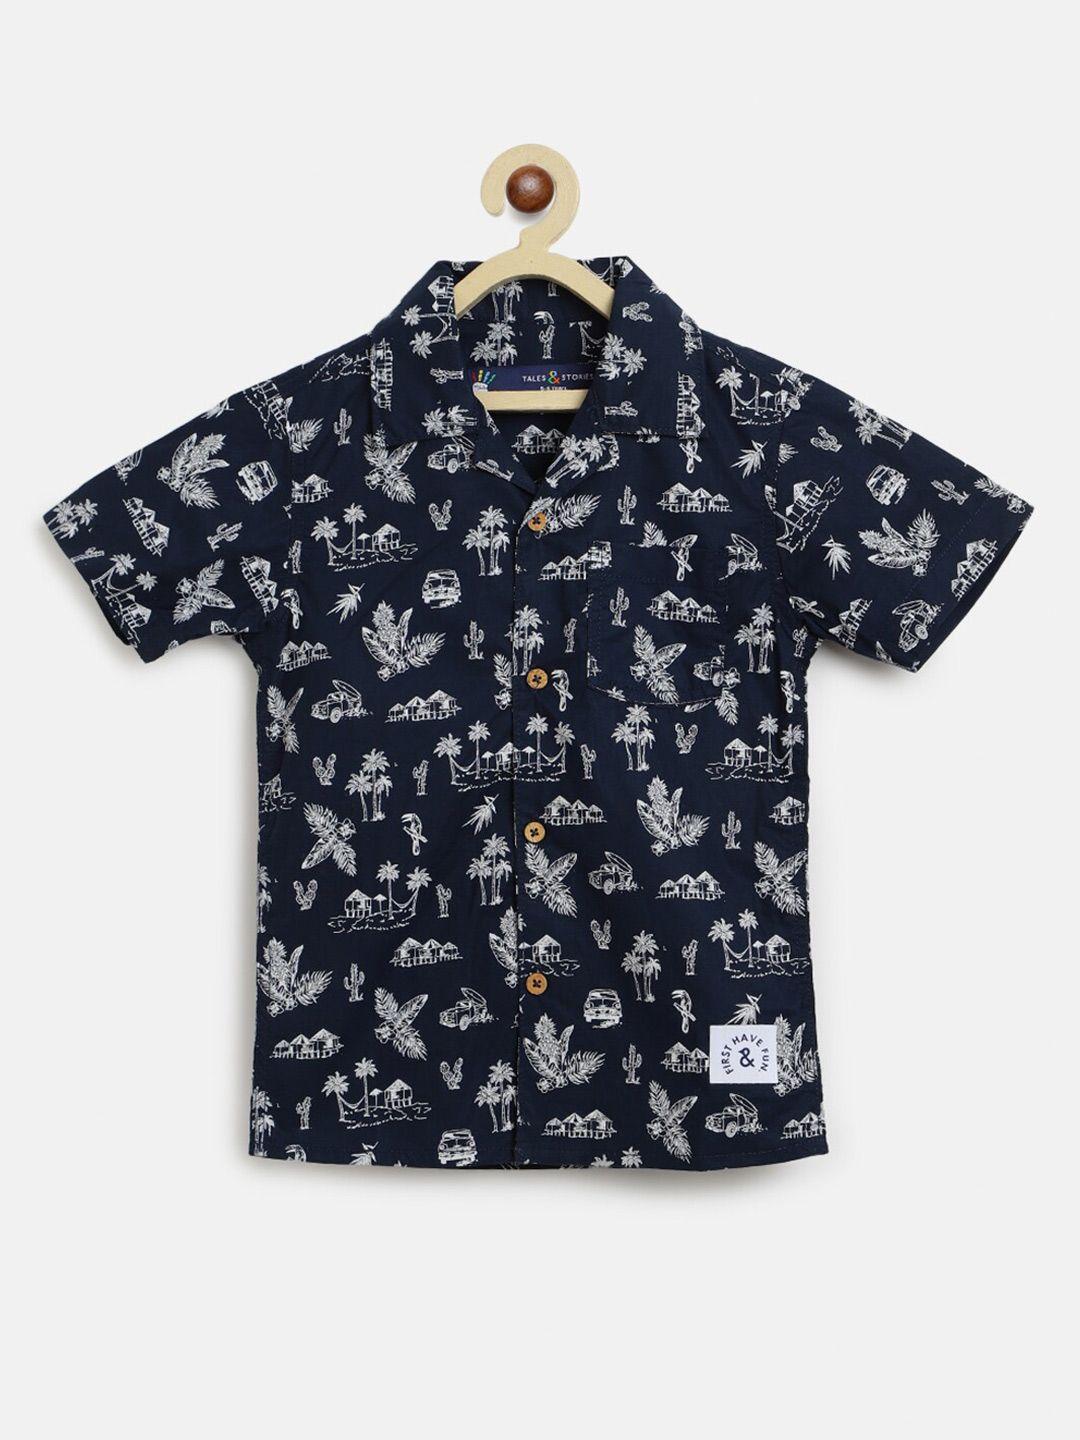 tales-&-stories-boys-navy-blue-printed-casual-shirt